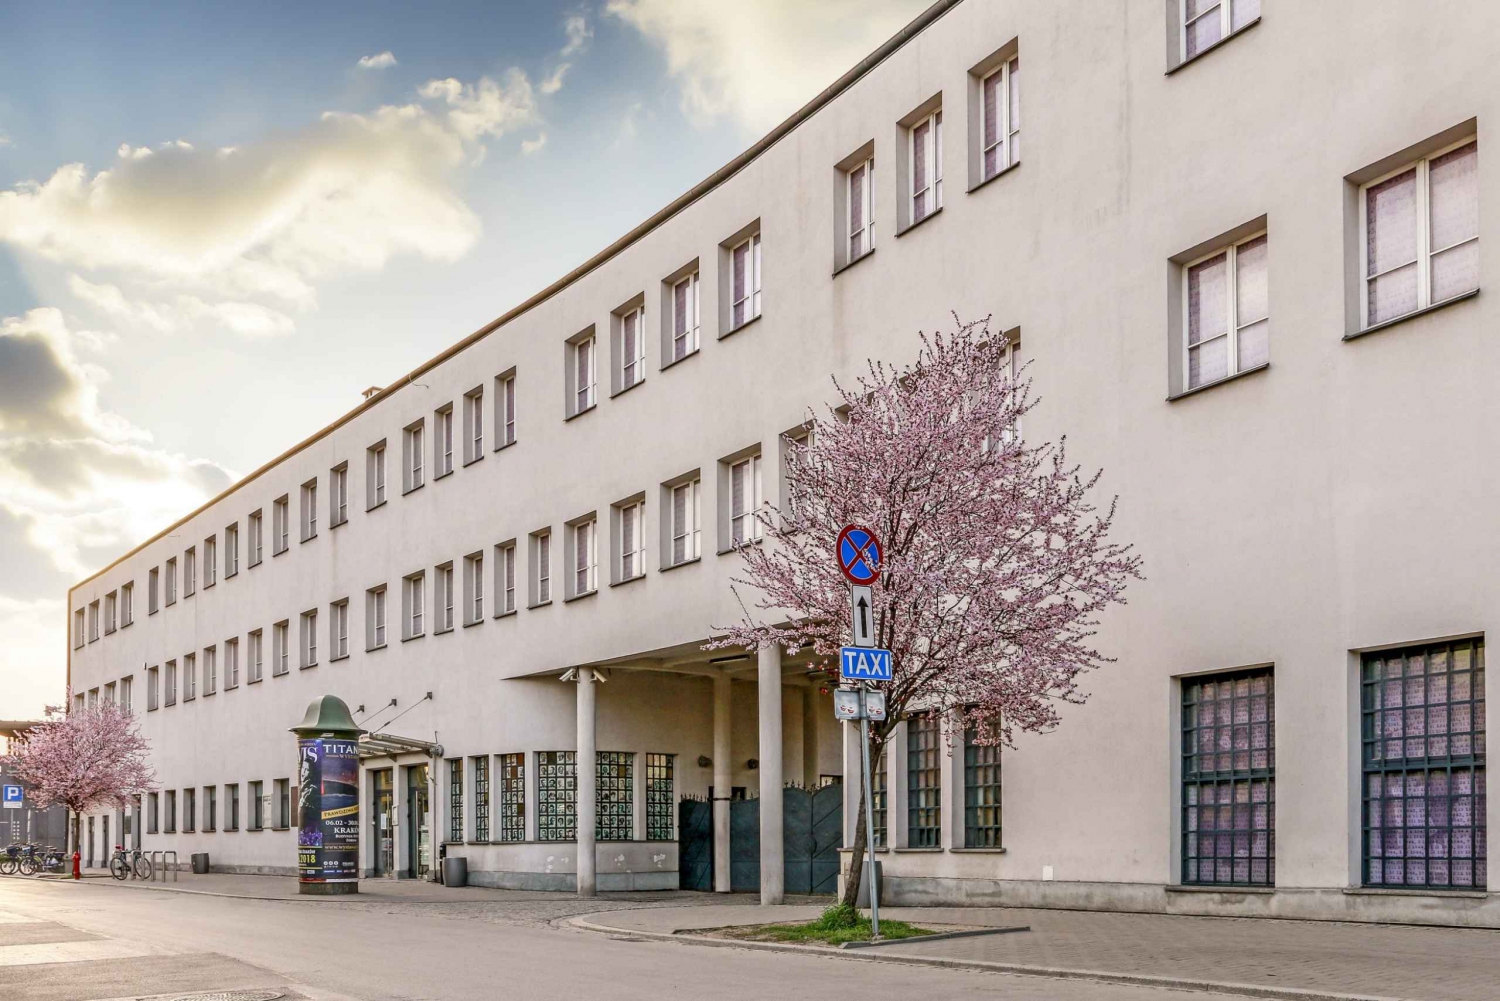 Krakow: Guided Schindler's Factory Tour with Entrance Ticket